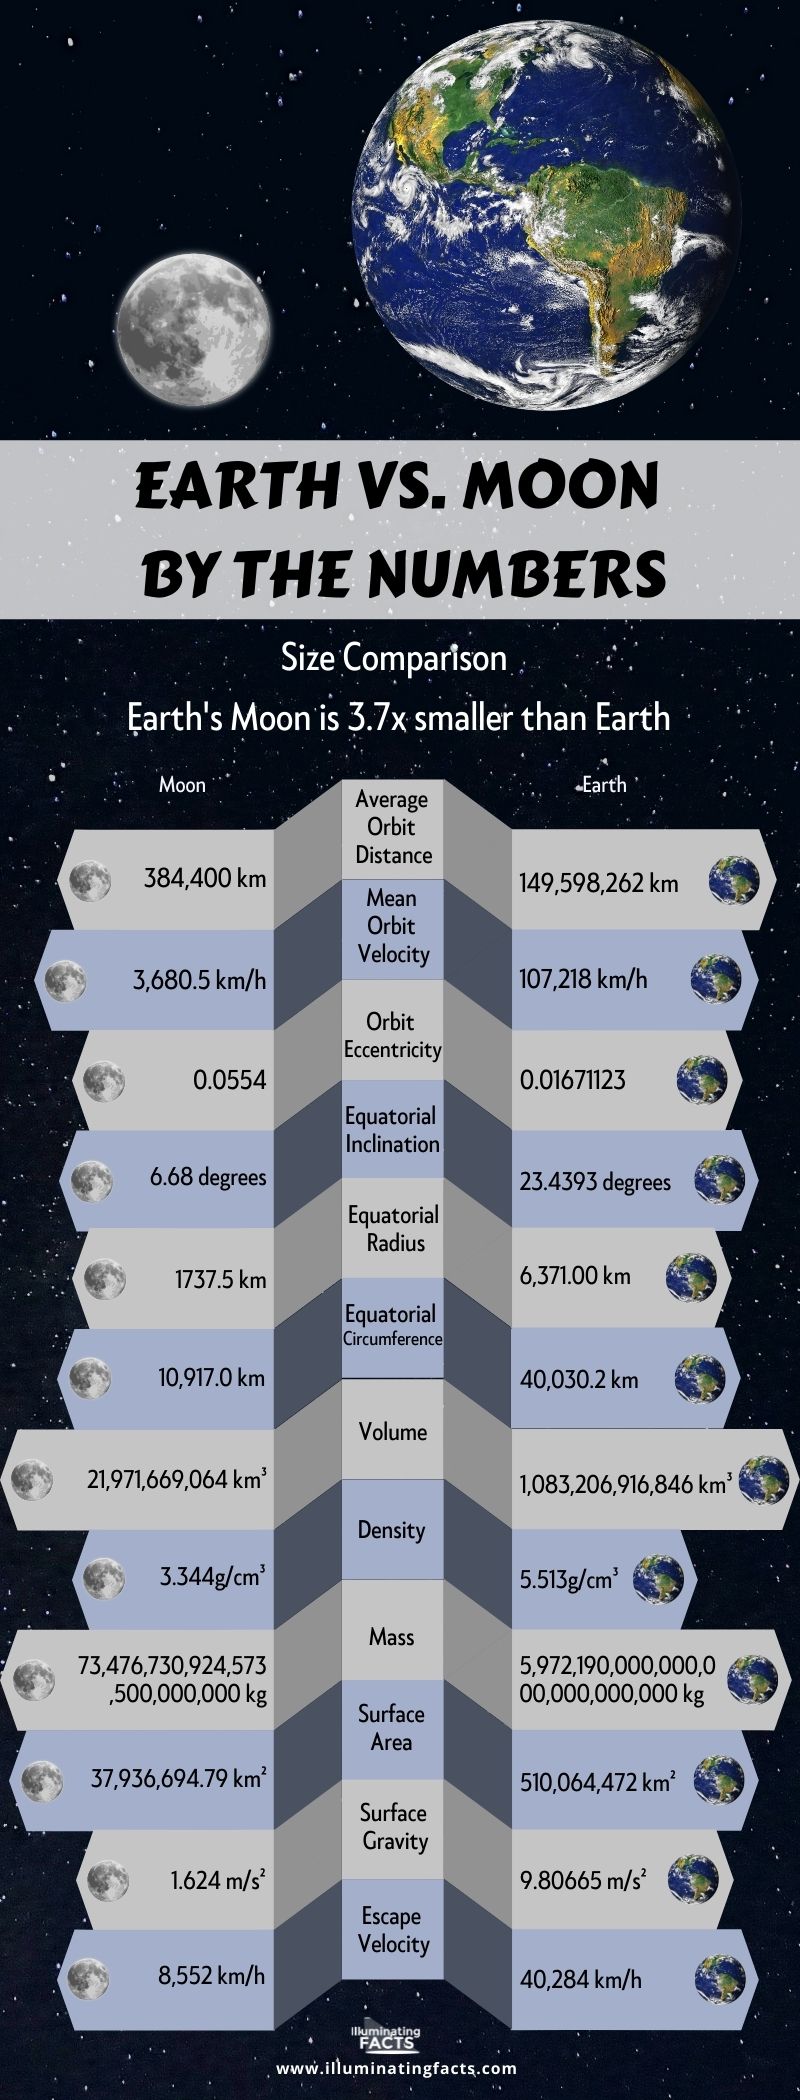 Earth vs. Moon by the Numbers